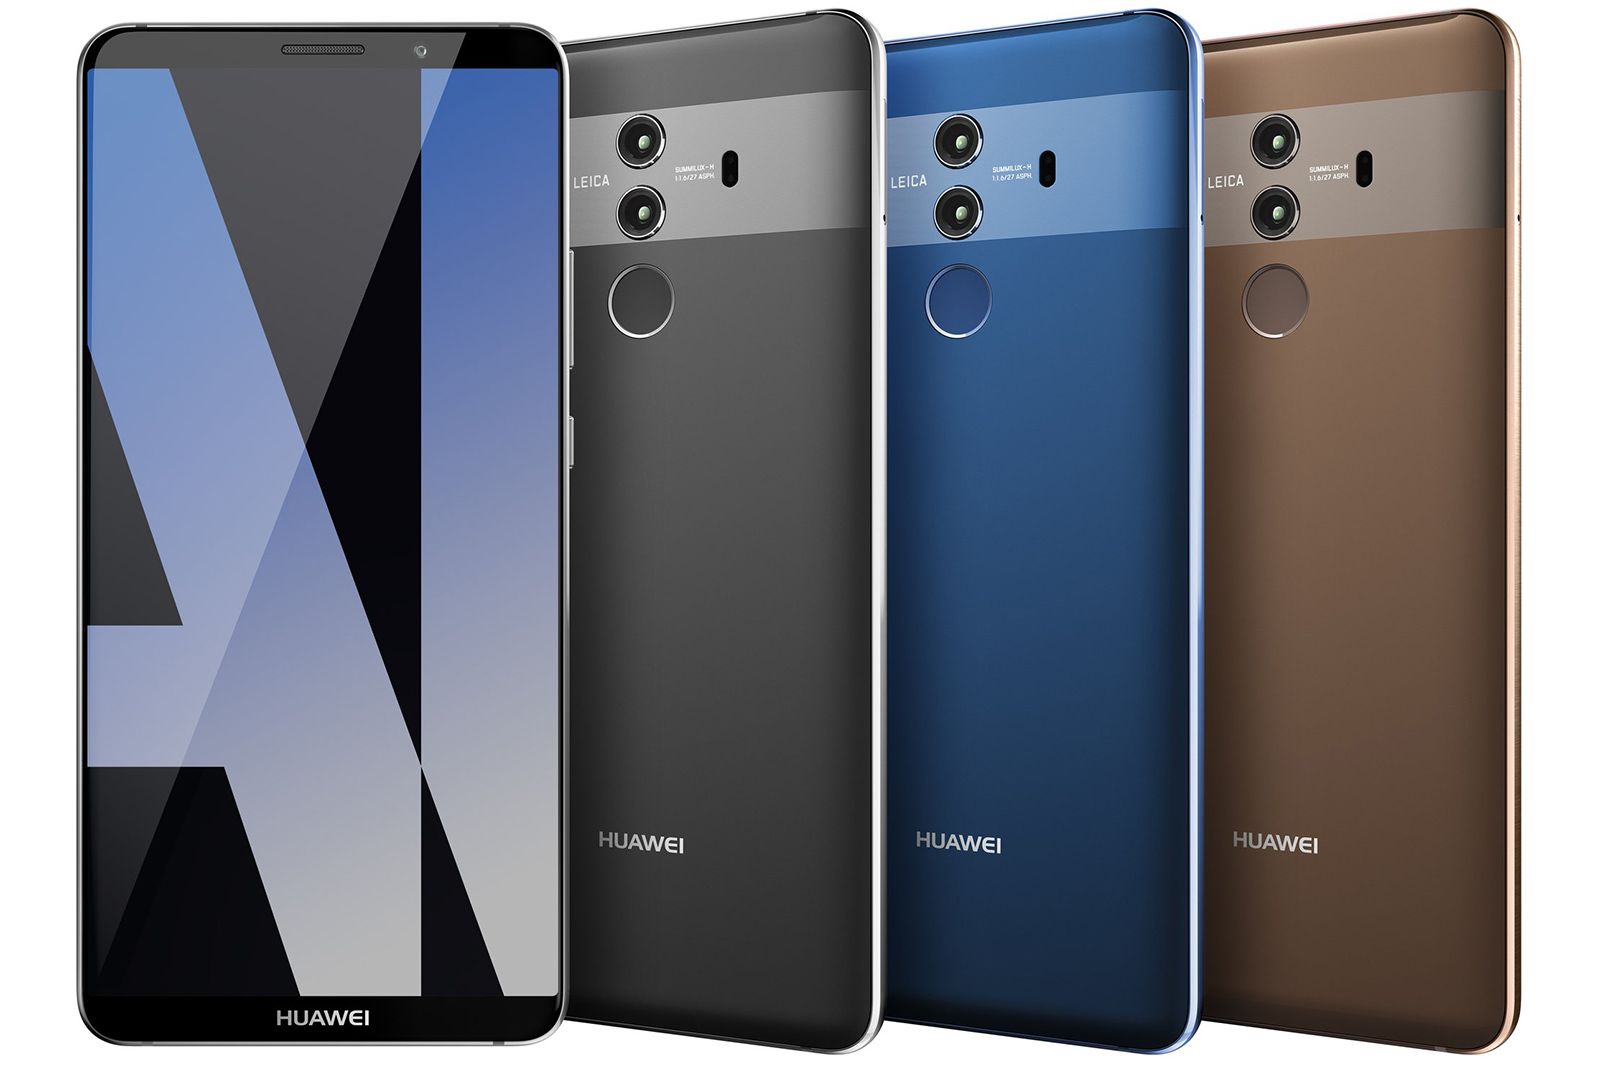 Huawei Mate 10 Pro shows its colours in official render image 1